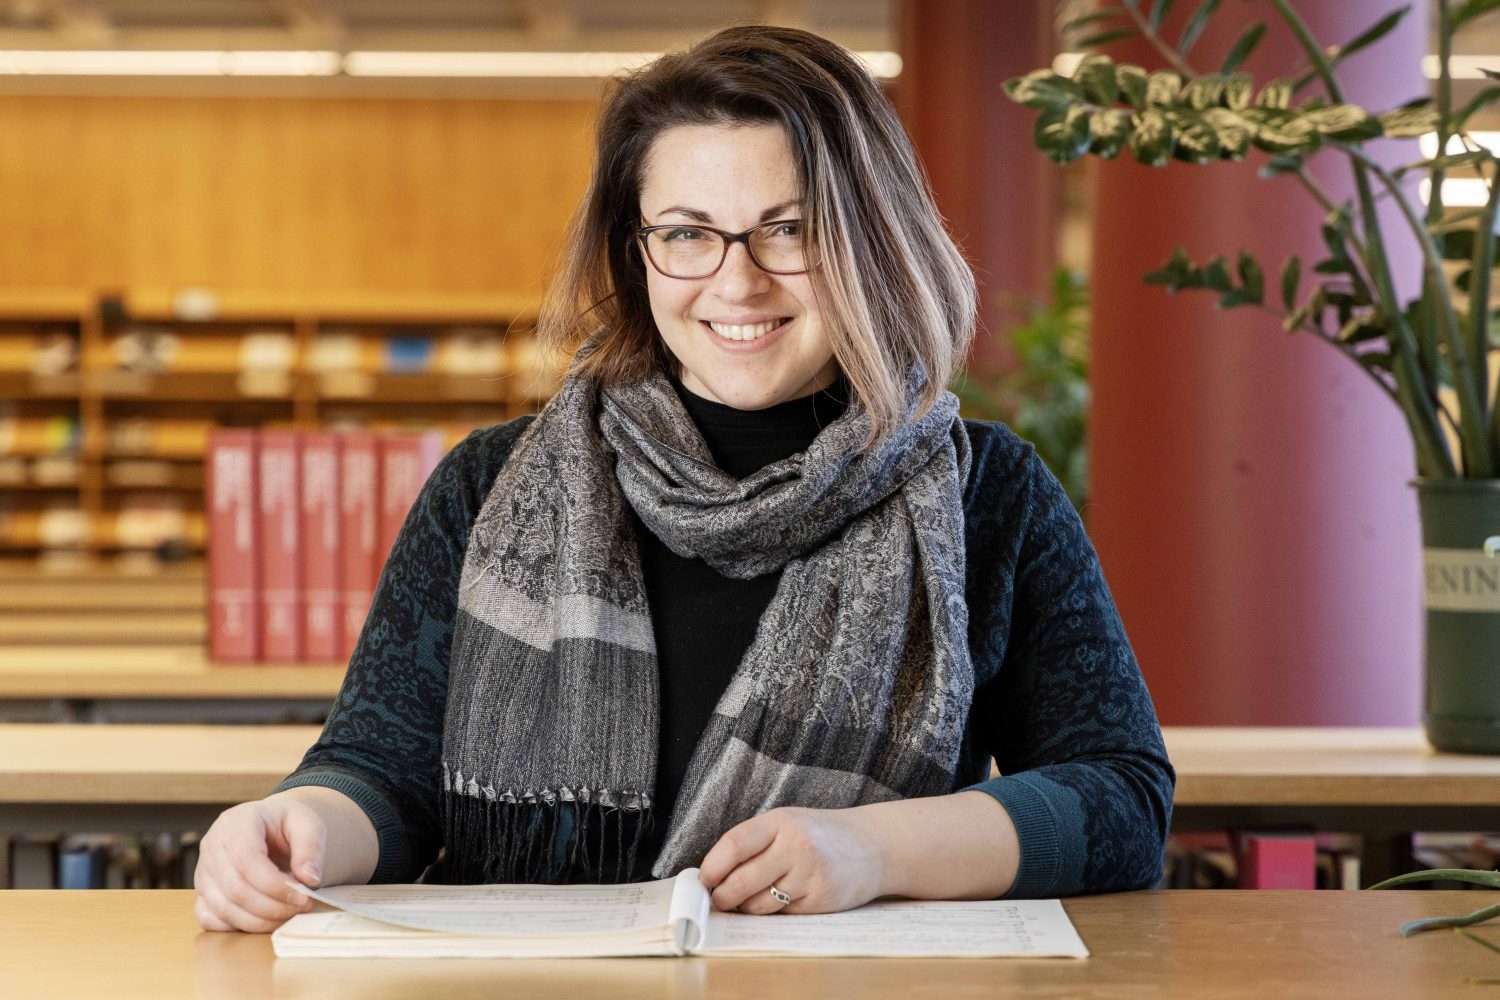 U of M graduate student Elena De Stasio Stabile photographed in the music library